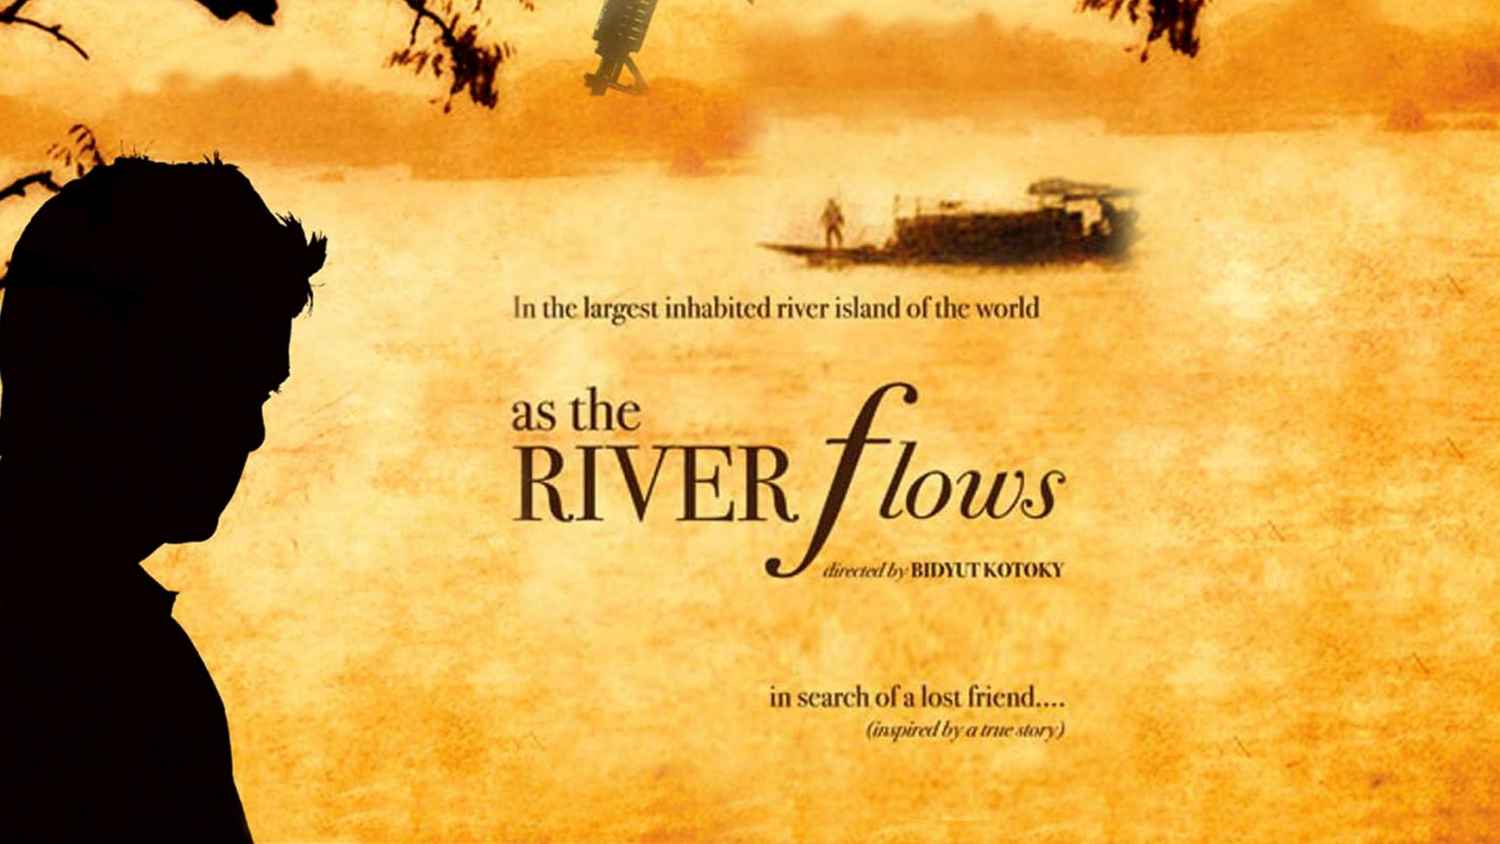 As The River Flows